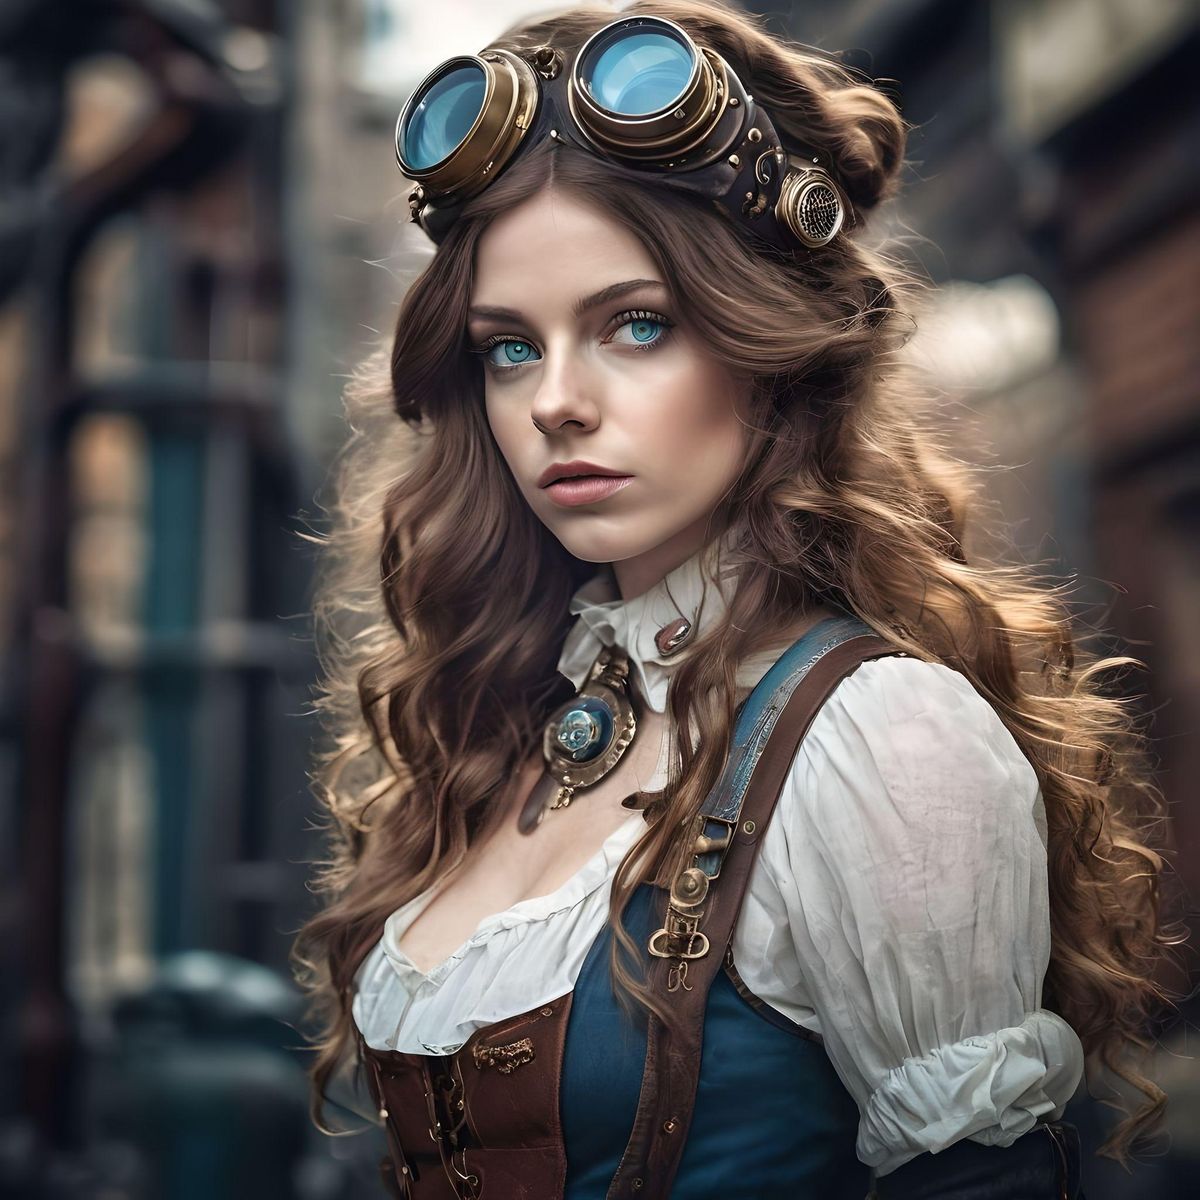 A beautiful steam punk girl with flowing brown hair and blue eyes